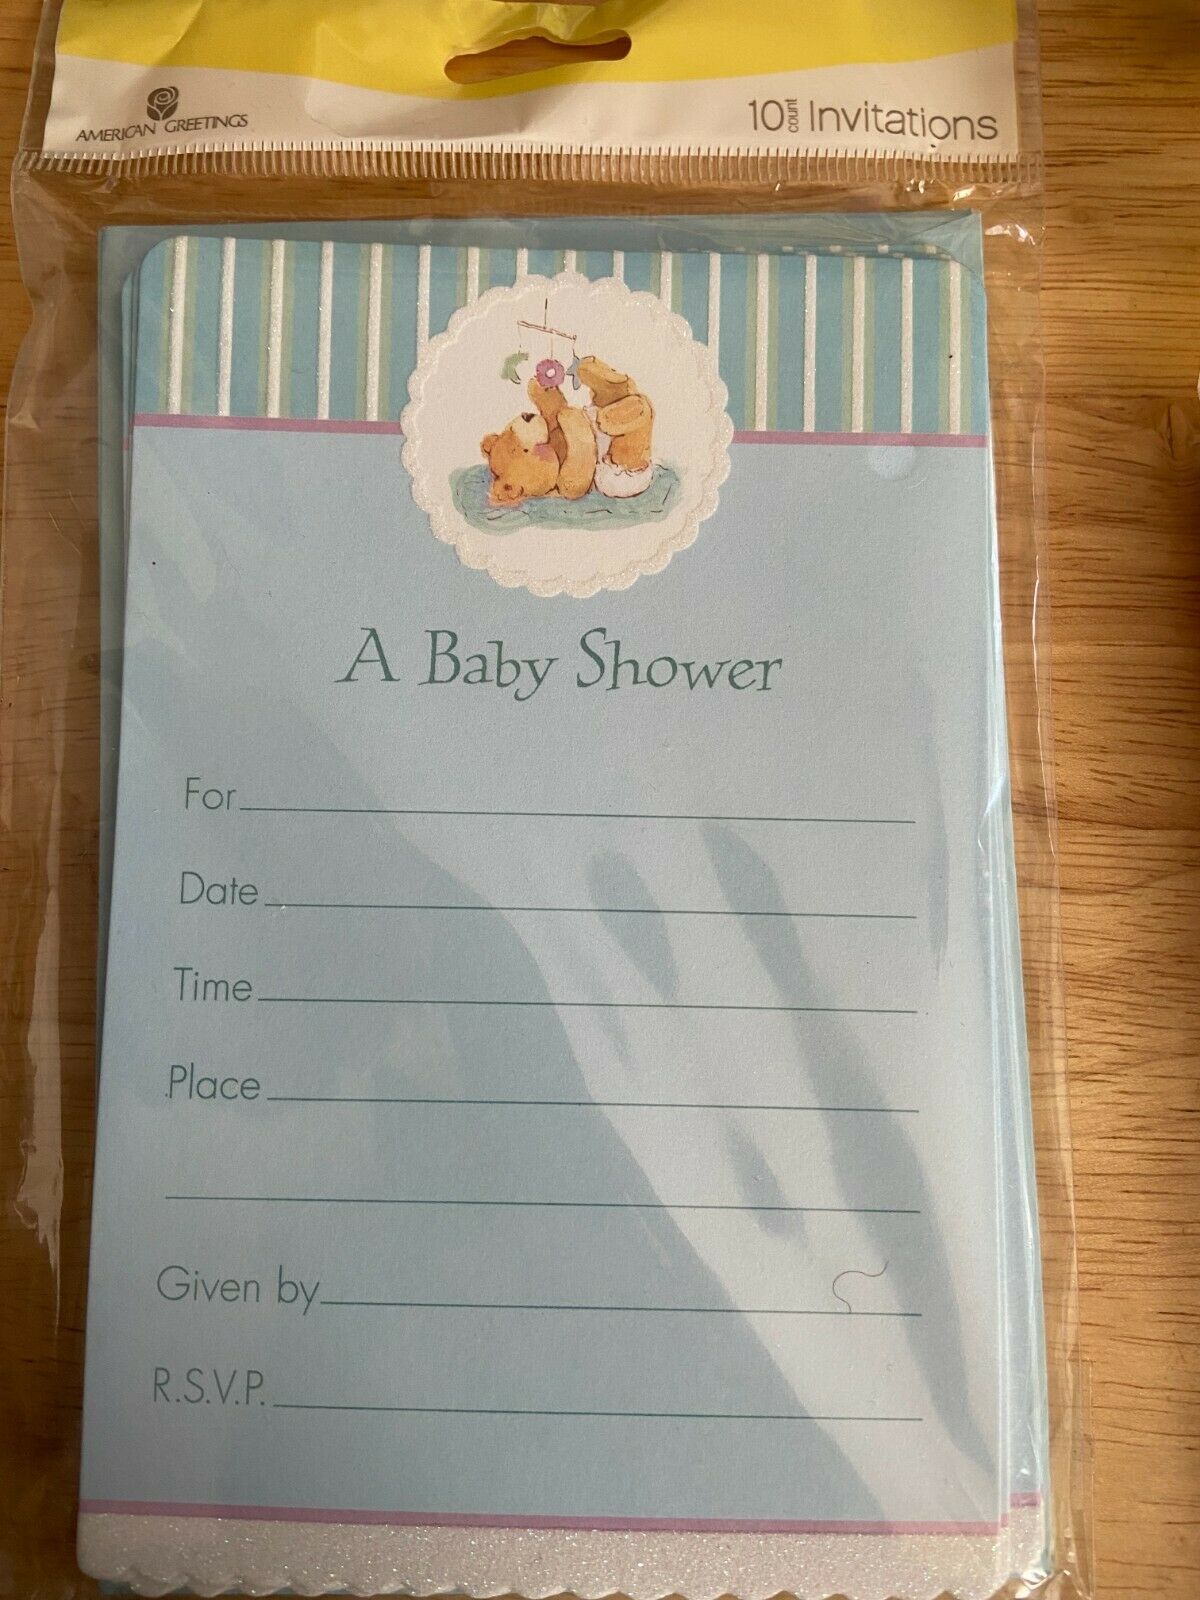 Primary image for 1 Pack of 10 American Greetings Boy's Baby Shower Invitations *NEW* bb1